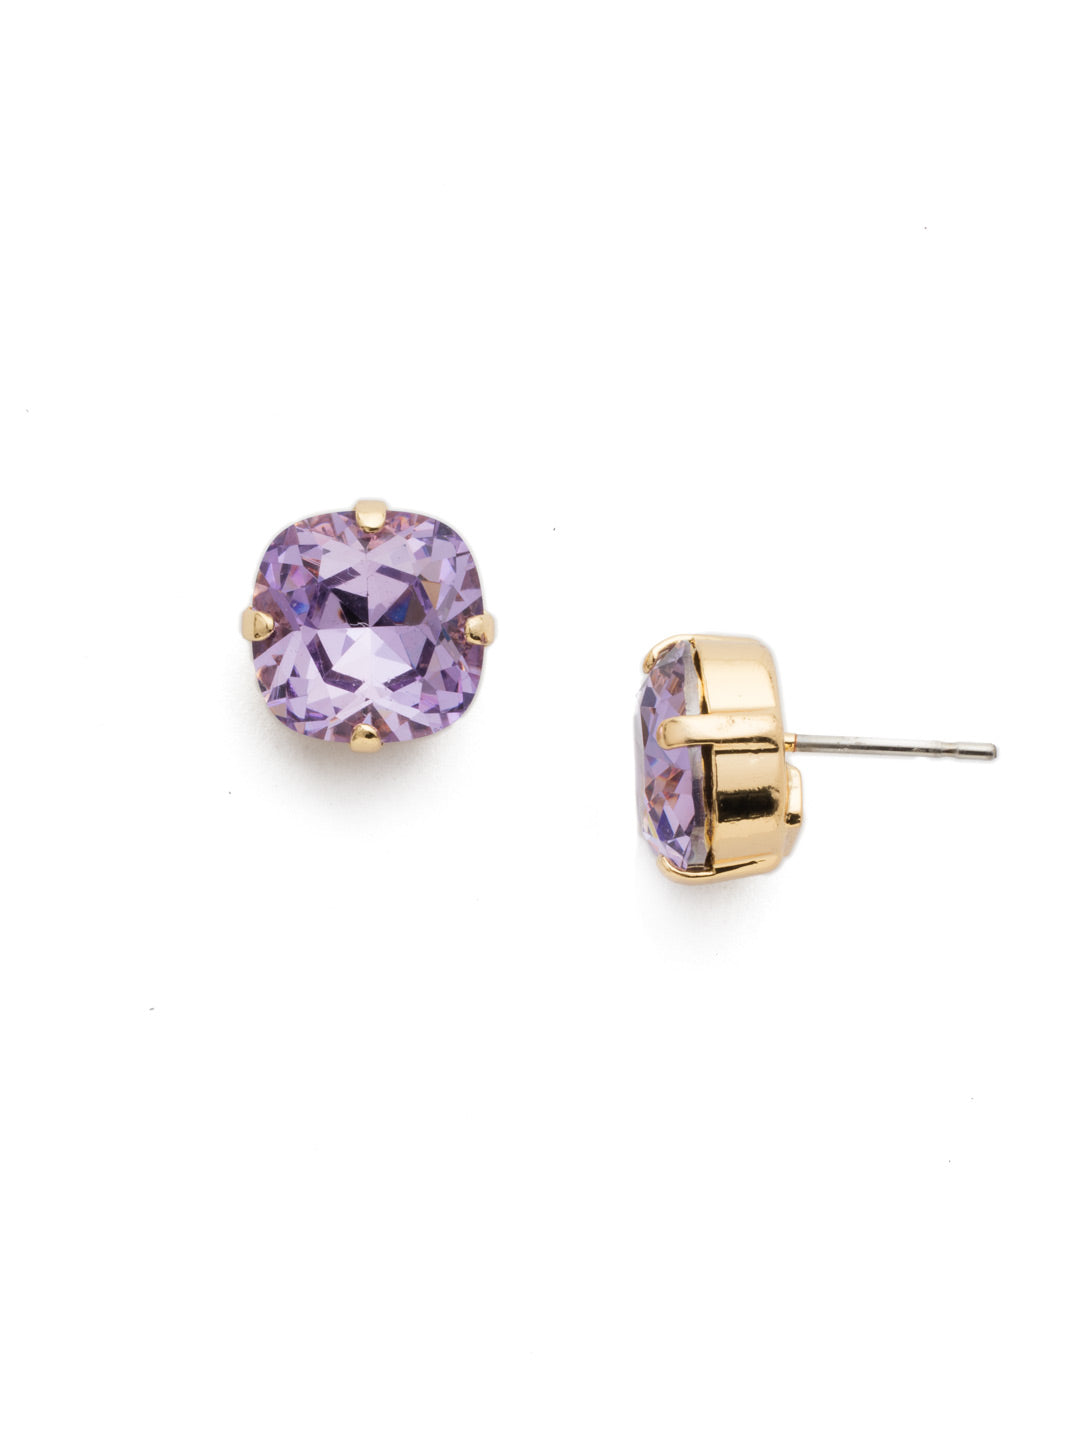 Halcyon Stud Earrings - EDH25BGVI - <p>A beautiful, luminous cushion-cut crystal in a classic four-pronged setting that's ideal for everyday wear. From Sorrelli's Violet collection in our Bright Gold-tone finish.</p>